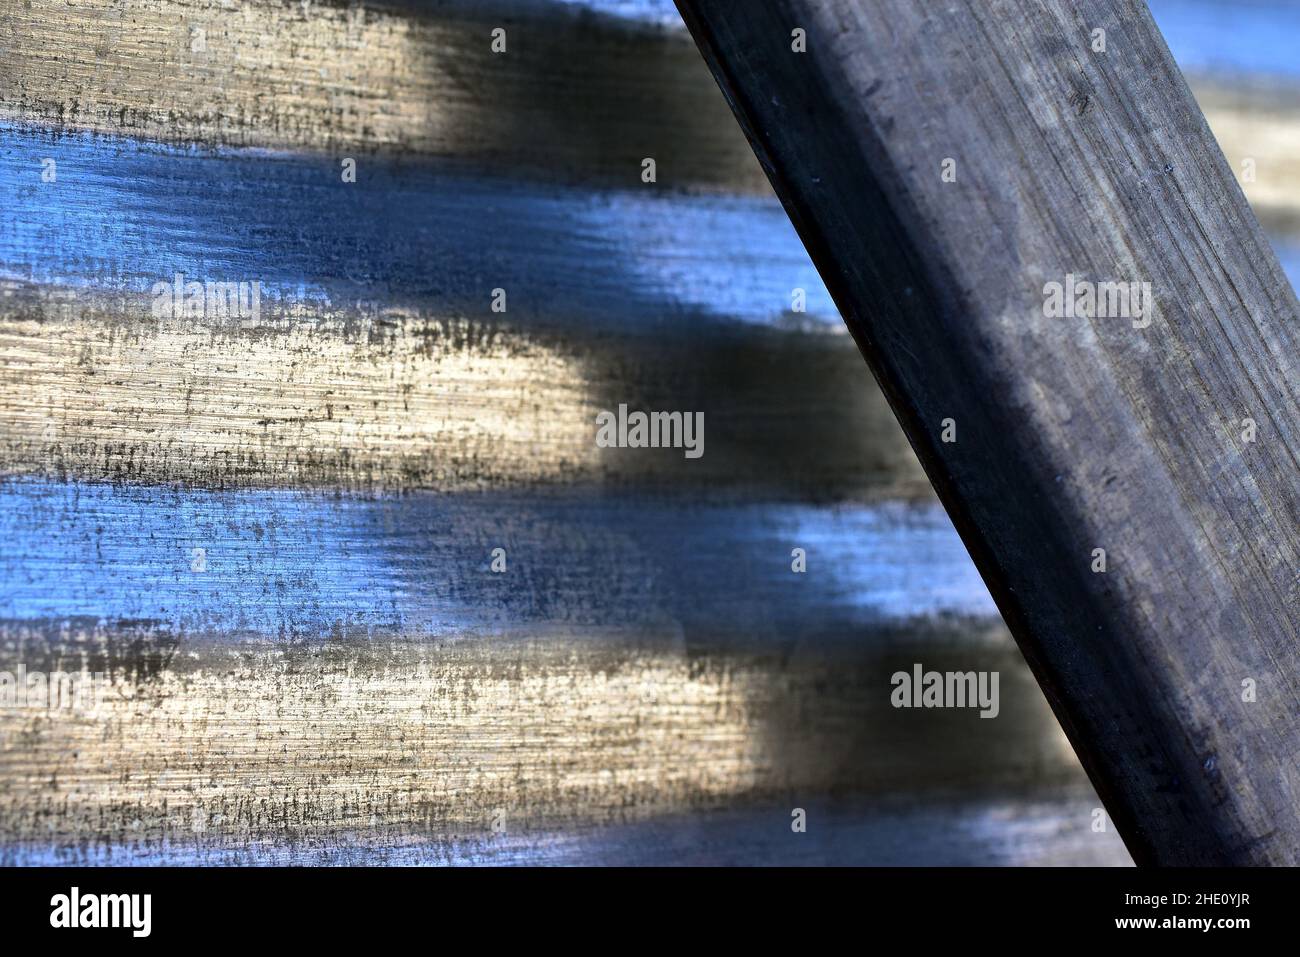 Abstract of Vertical and Horizontal Blue and Tan Textured Wood Lines Stock Photo